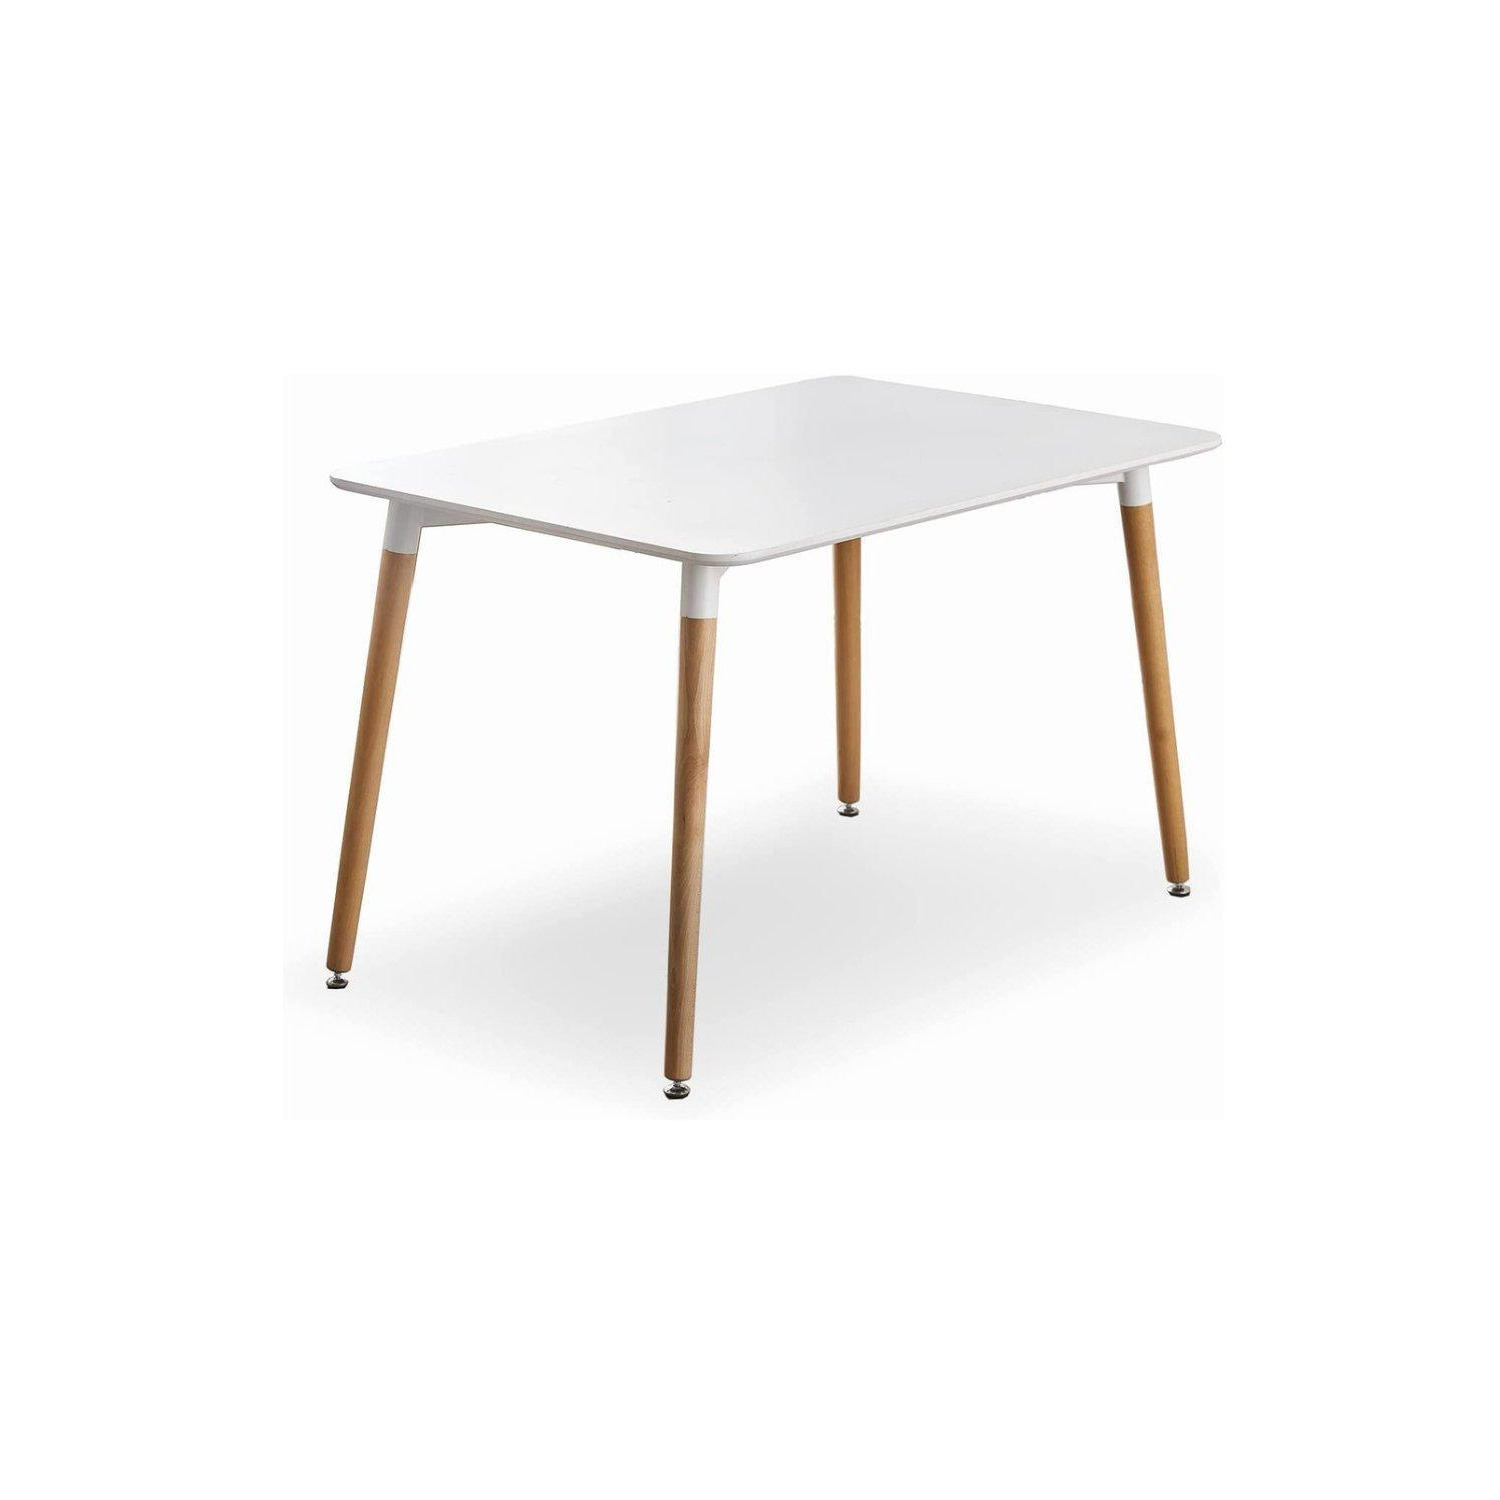 'Halo' 4 or 6 Seating Dining Table Single - image 1